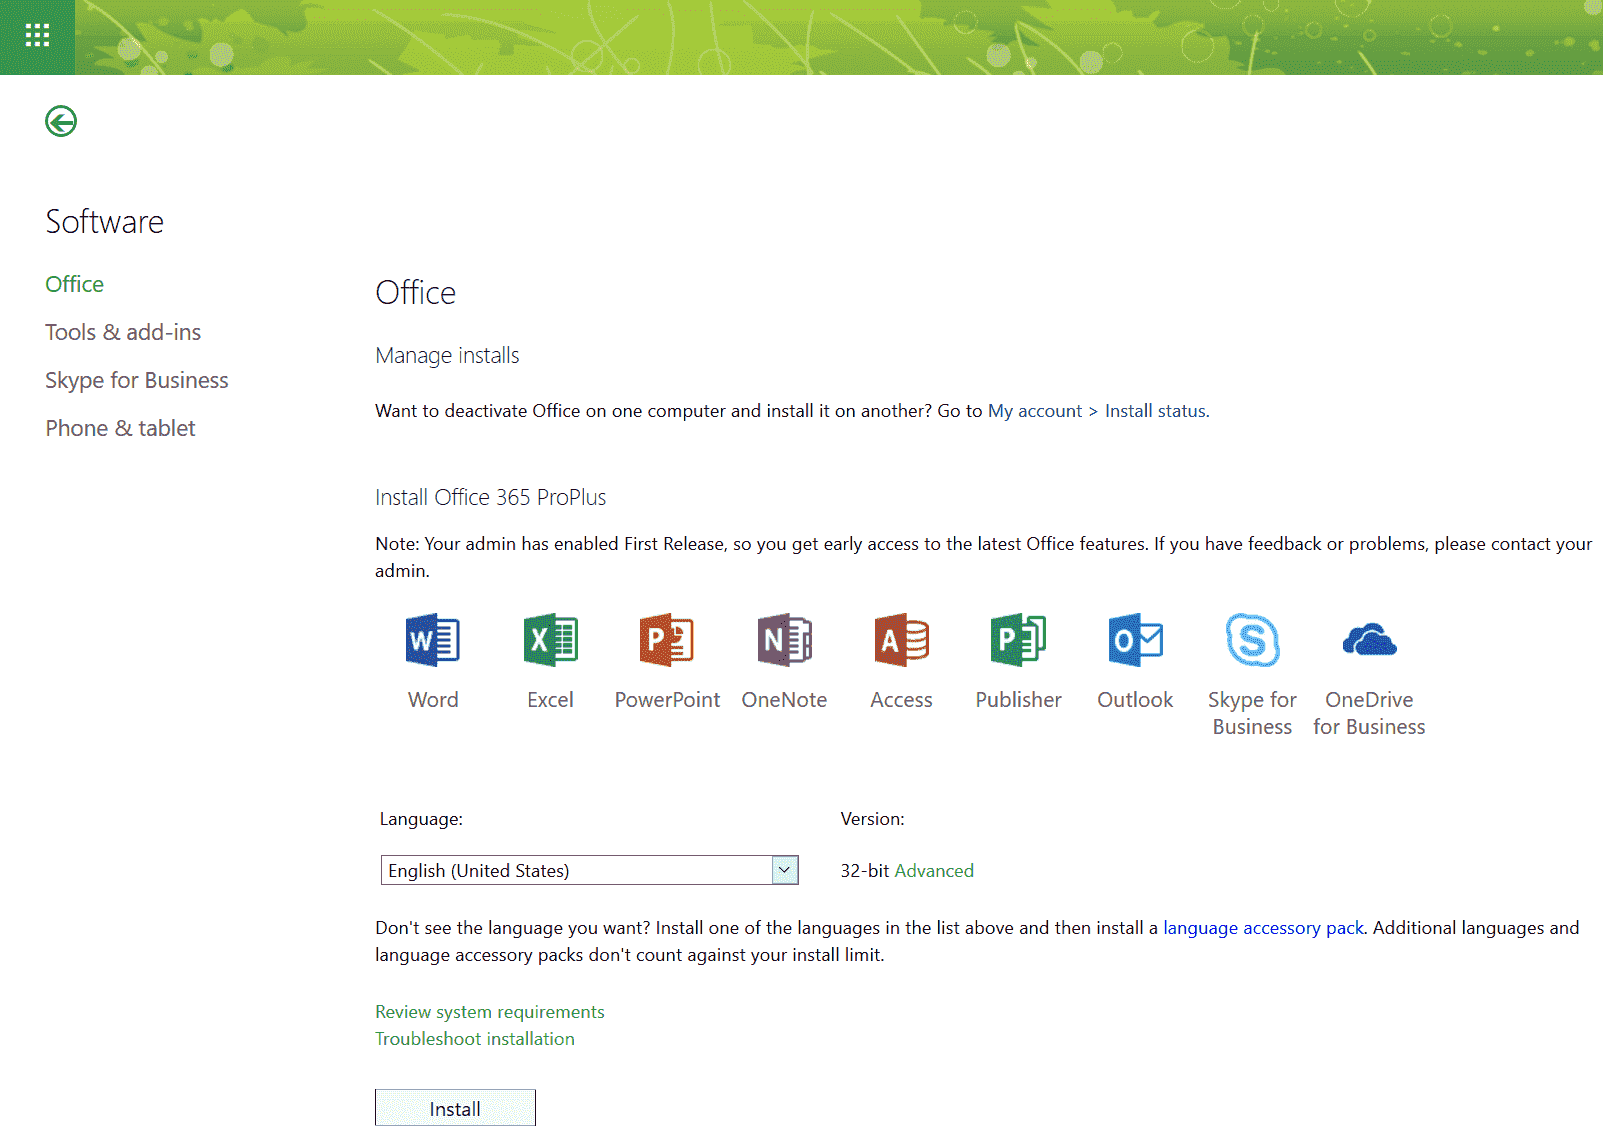 How to Install Office 365 Pro Plus with the new Ribbon Interface on Windows 10 b4c4251a-dd0e-433b-a683-fd866336c64f?upload=true.png